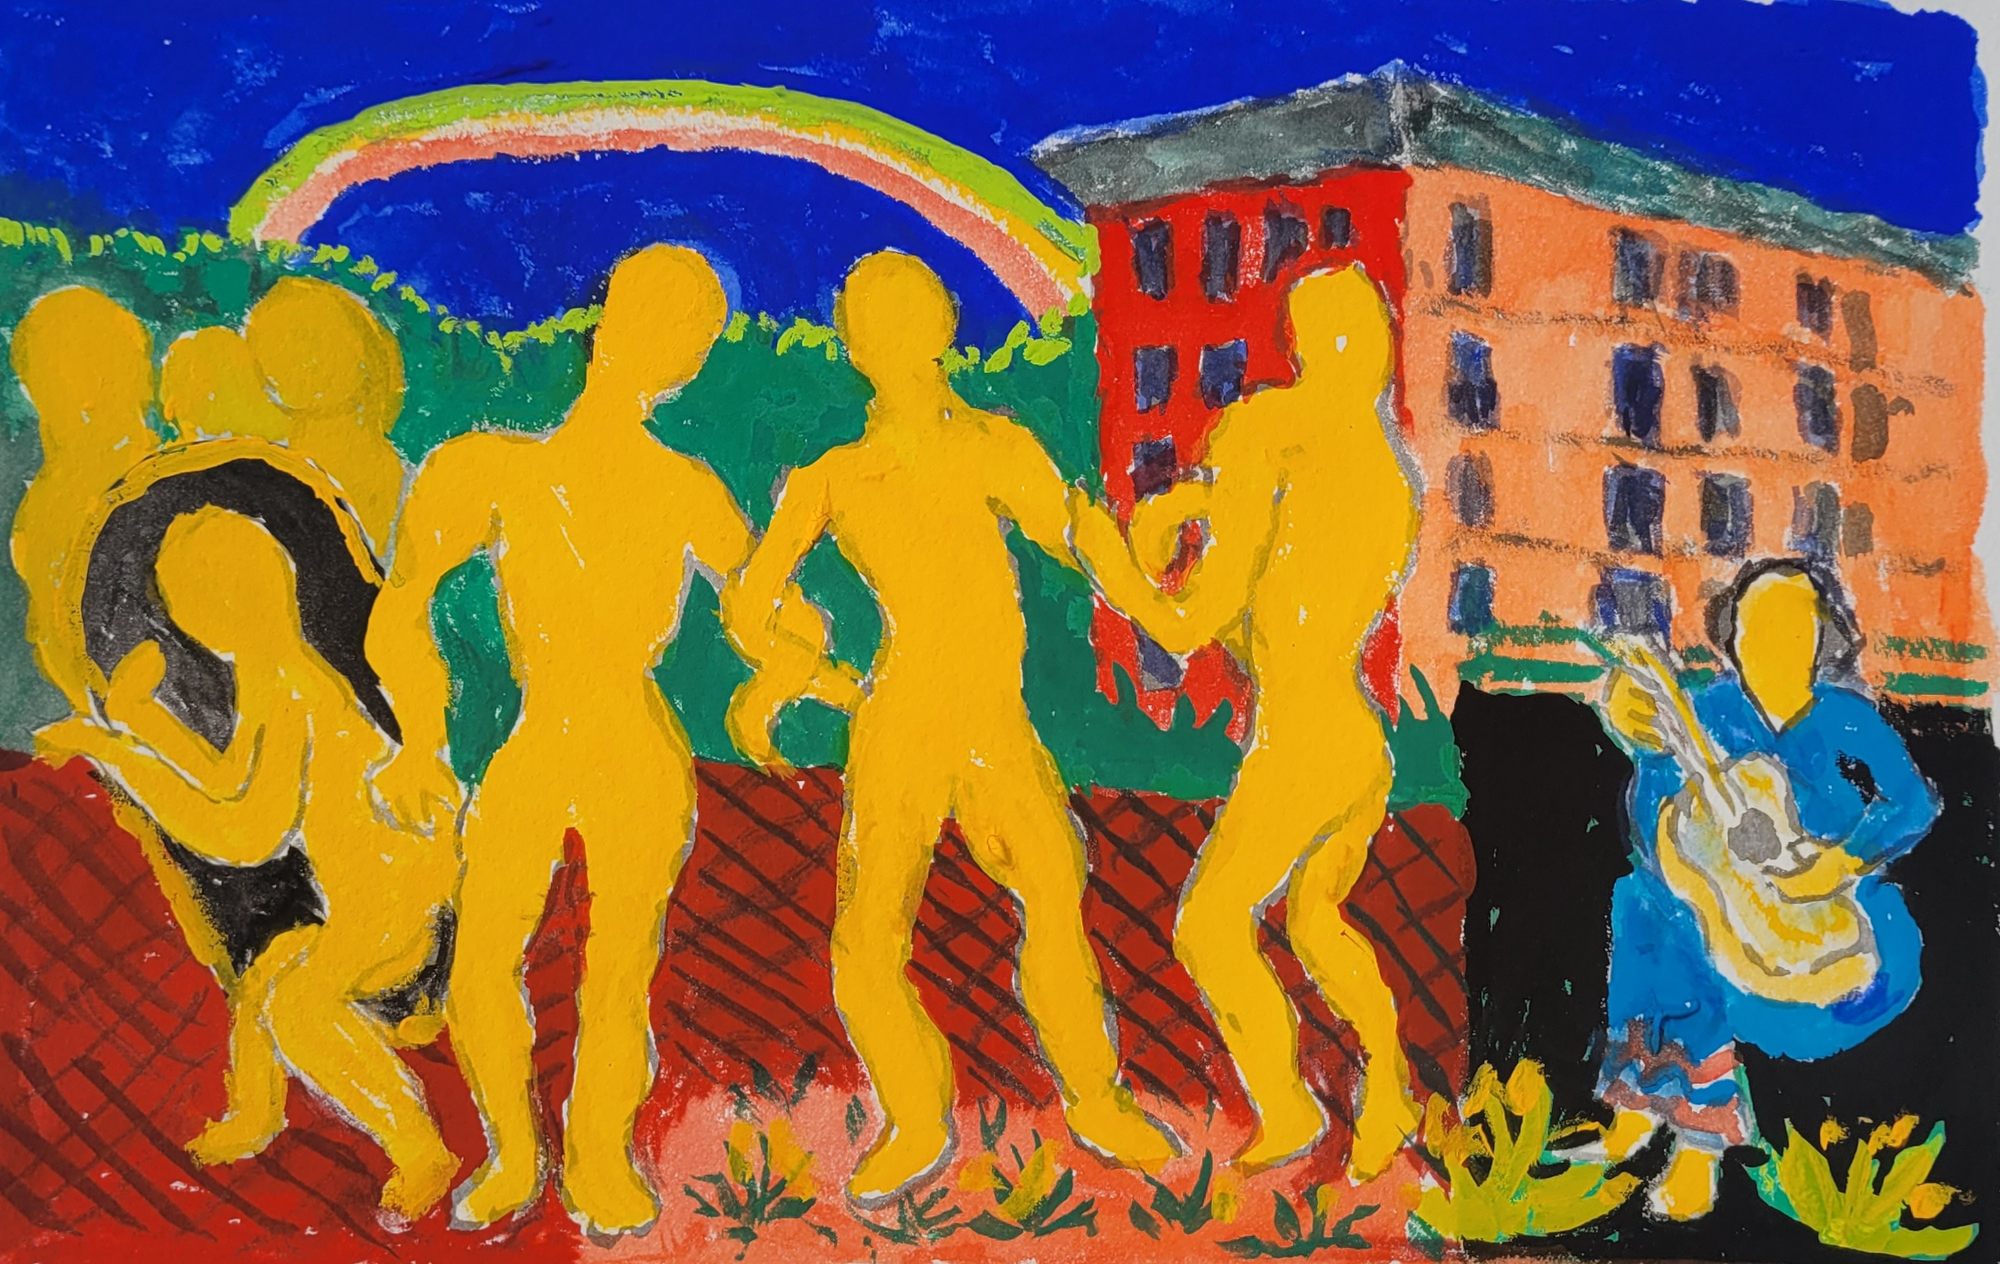 An abstract illustration of figures entangled, dancing. Outlines of yellow figures stand in centre, arms locked together. There is a group huddled on the left and on the right a figure in a blue dress holding a guitar. Behind them is greenery, a large block of flats, and a rainbow. Flowers are at their feet.